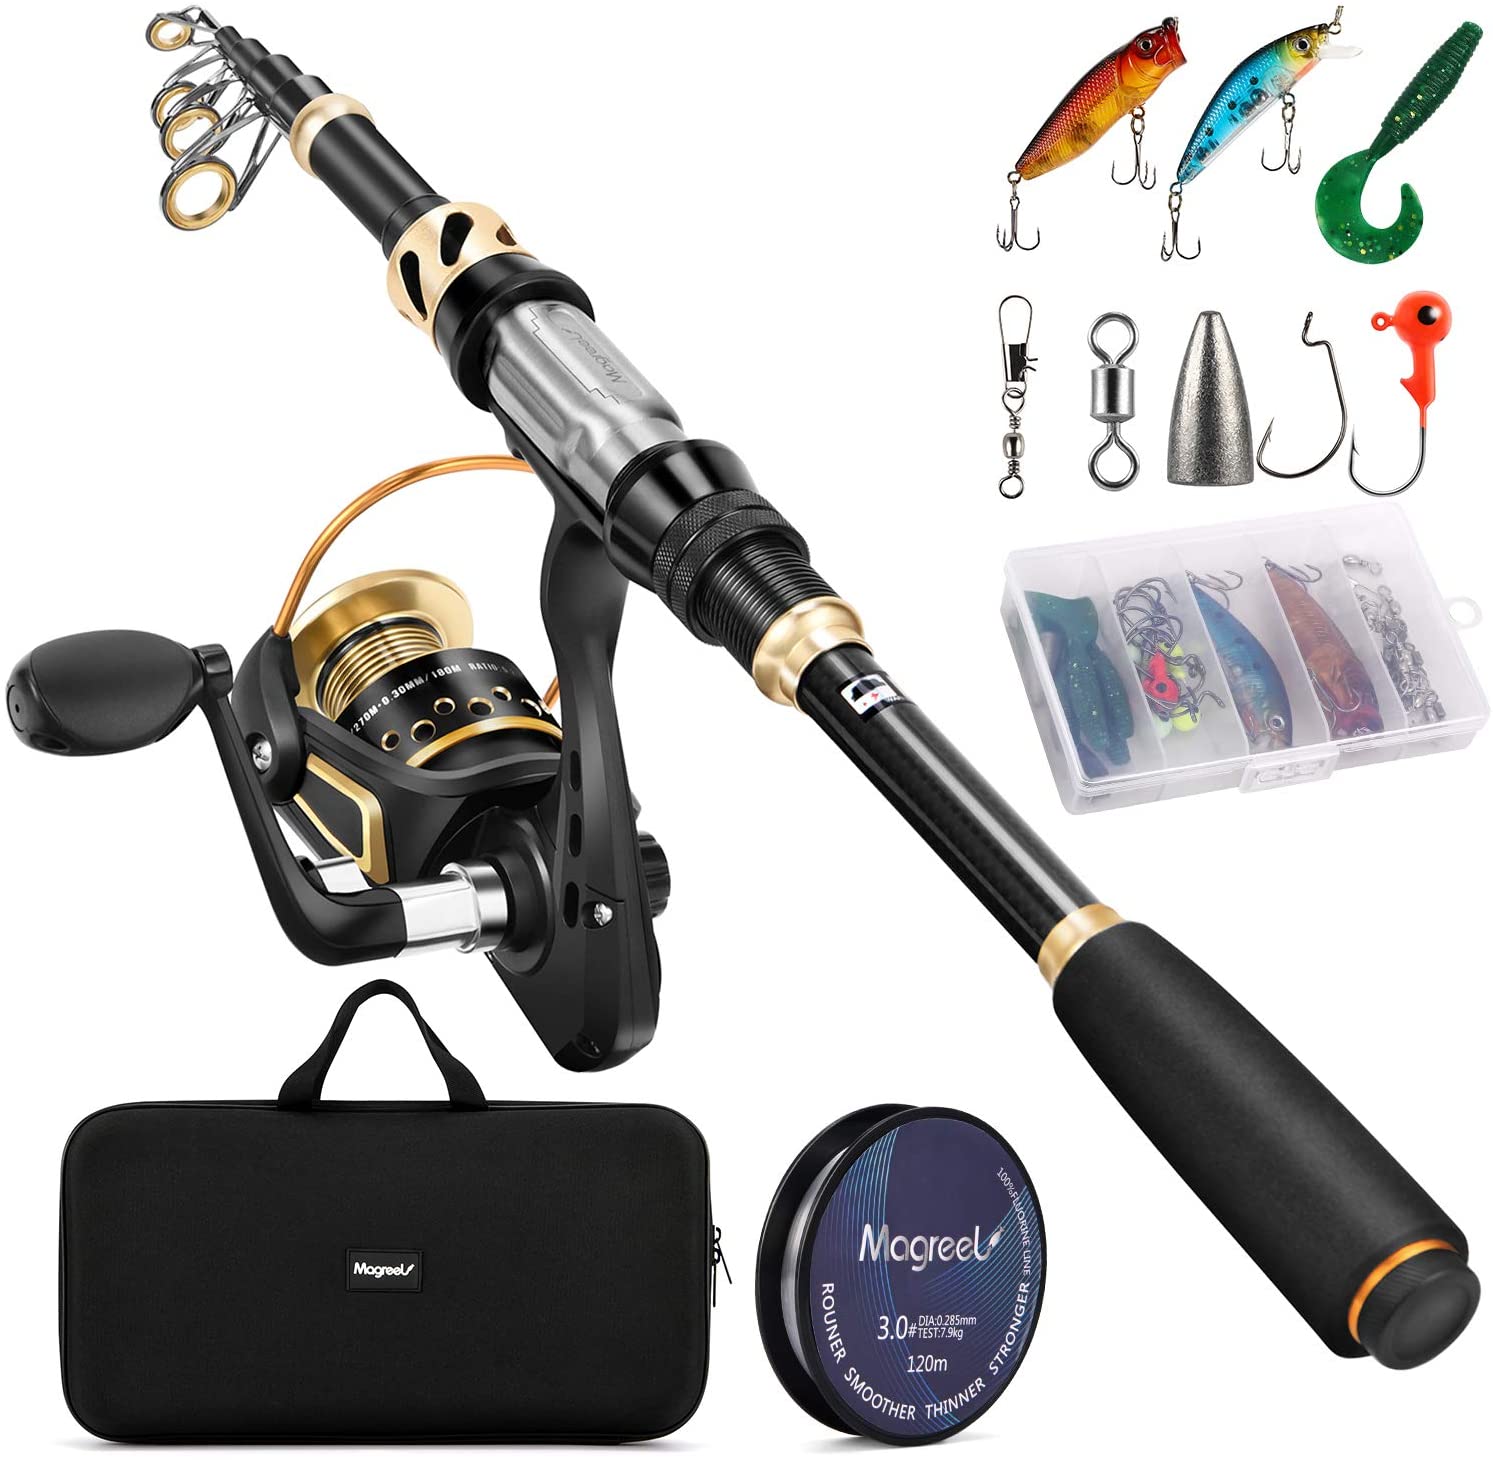 Magreel Telescope Fishing Rod and Reel Combo with Lures & Accessories + Carry Bag (7578134282478)